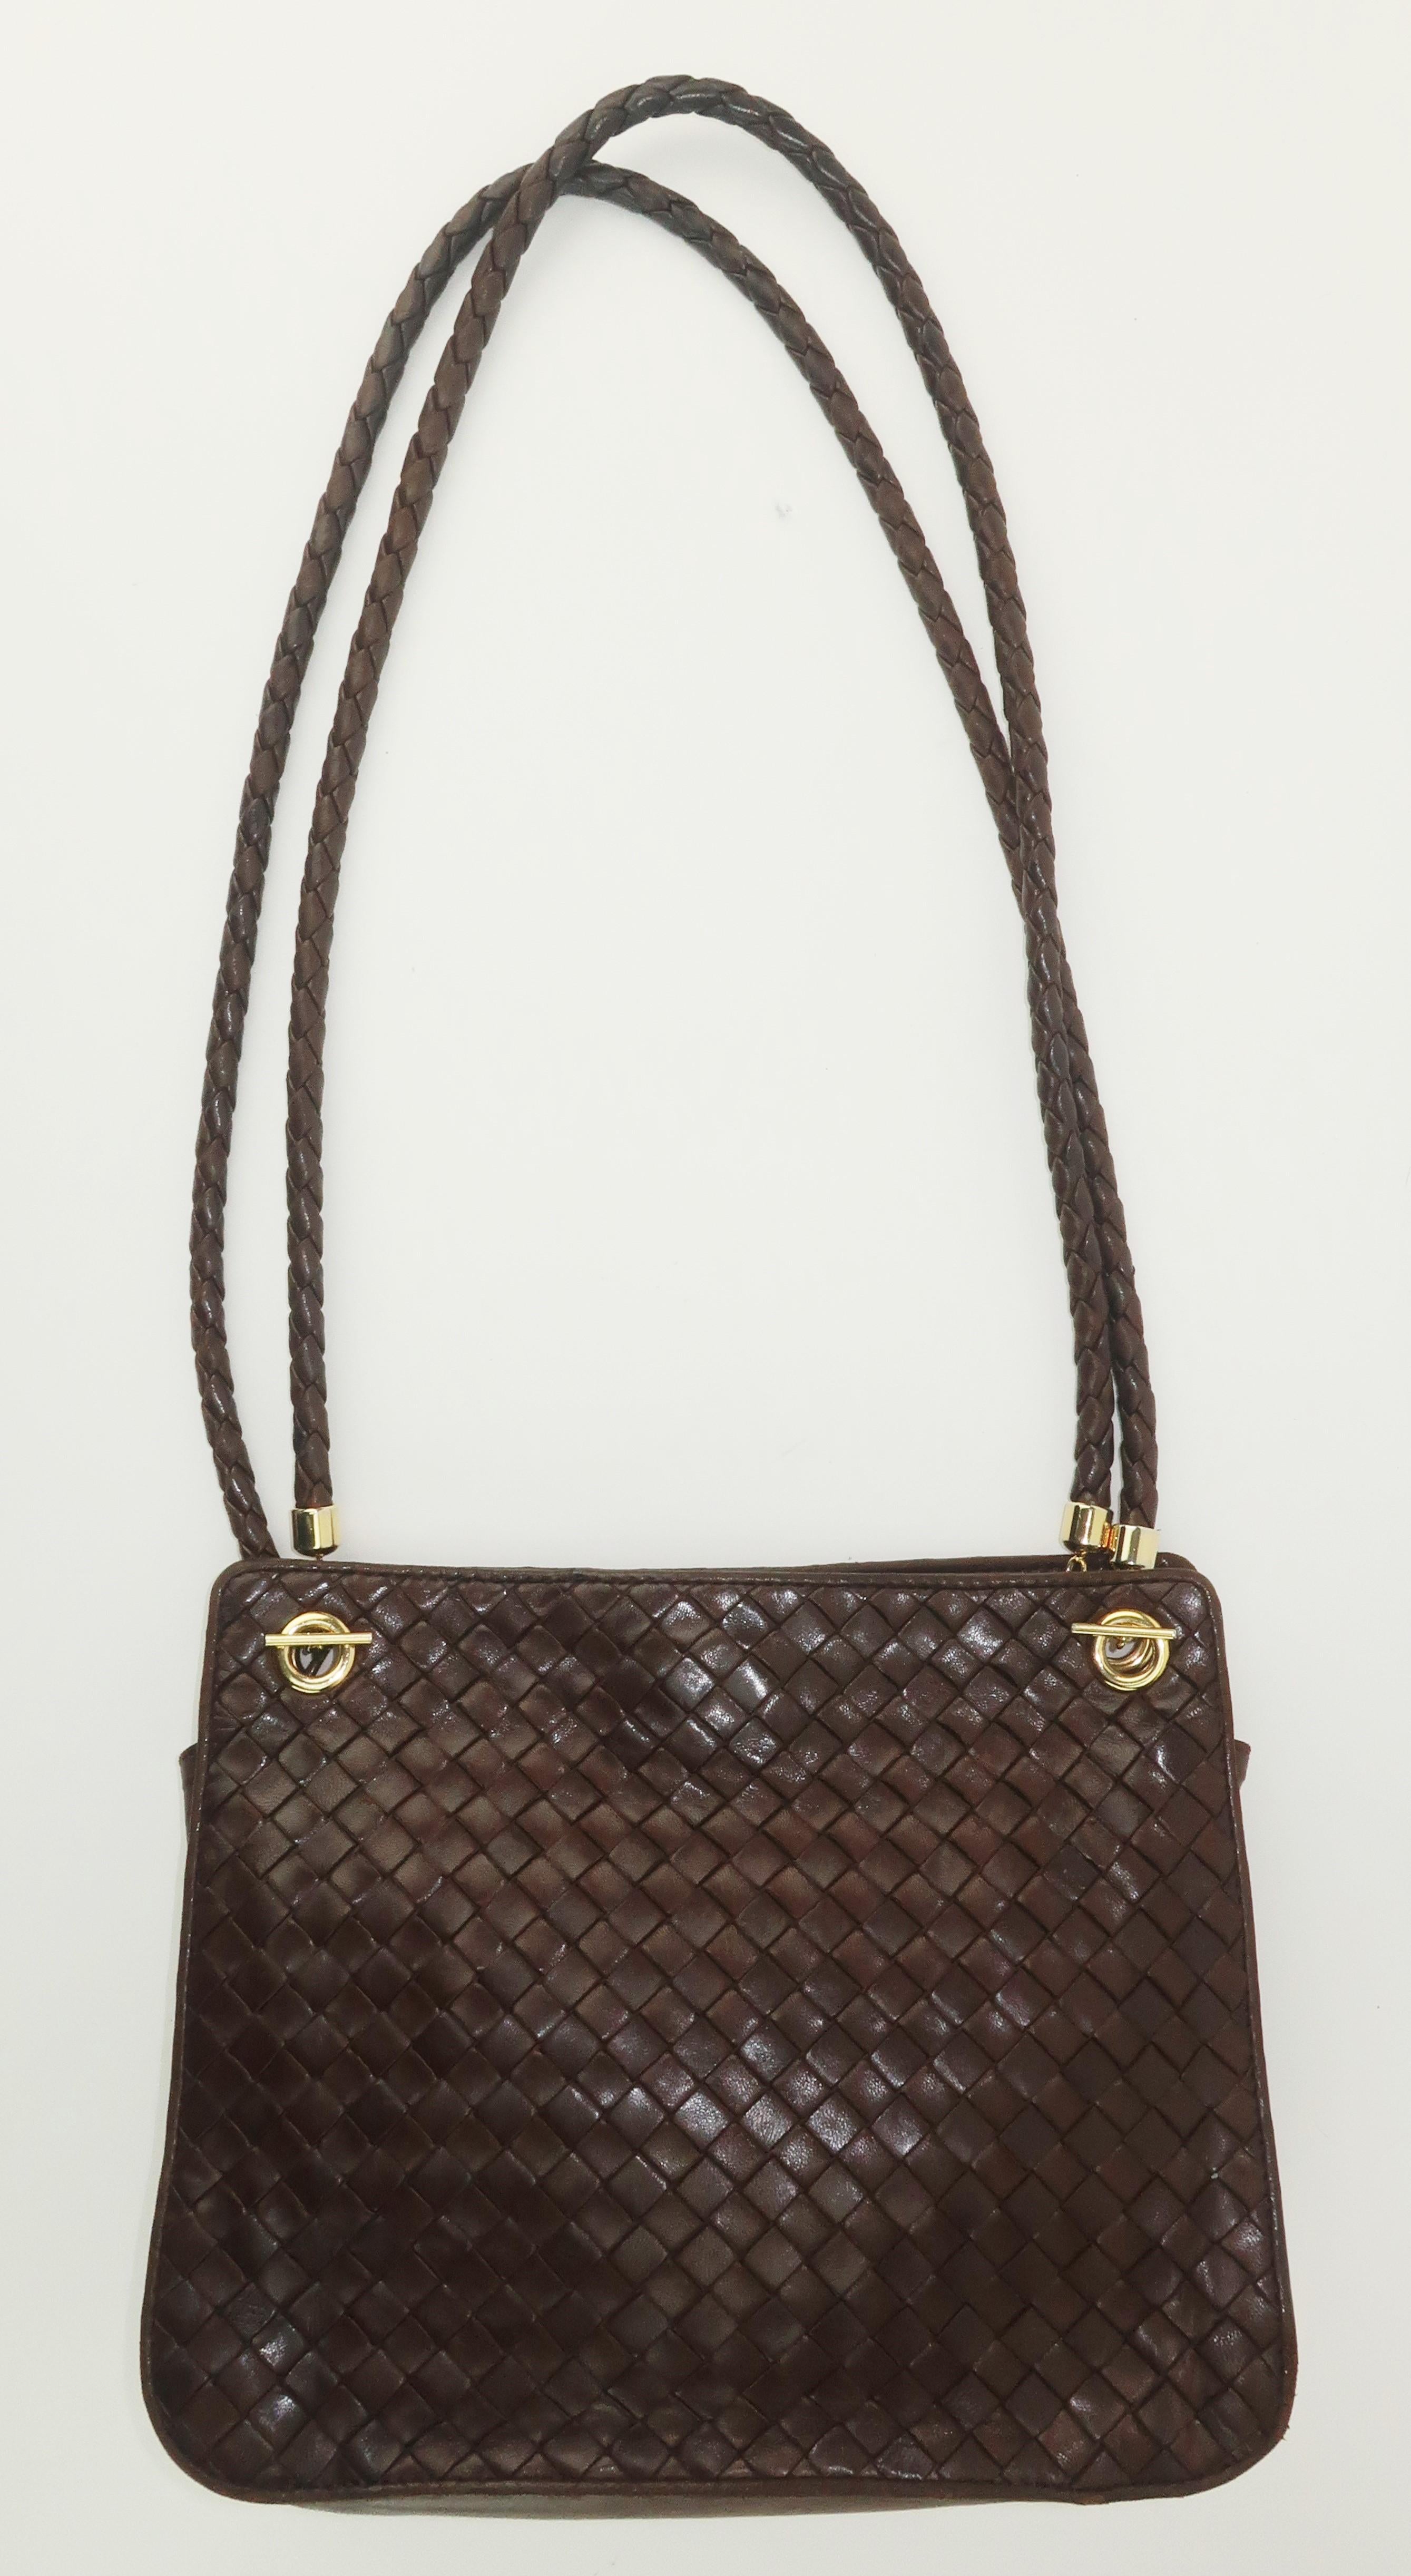 'When your own initials are enough' ... the iconic philosophy of the Italian fashion house, Bottega Veneta.  Bottega's unique 'intrecciato' woven leather design speaks volumes about style and quality without the necessity of a logo.  This beautiful